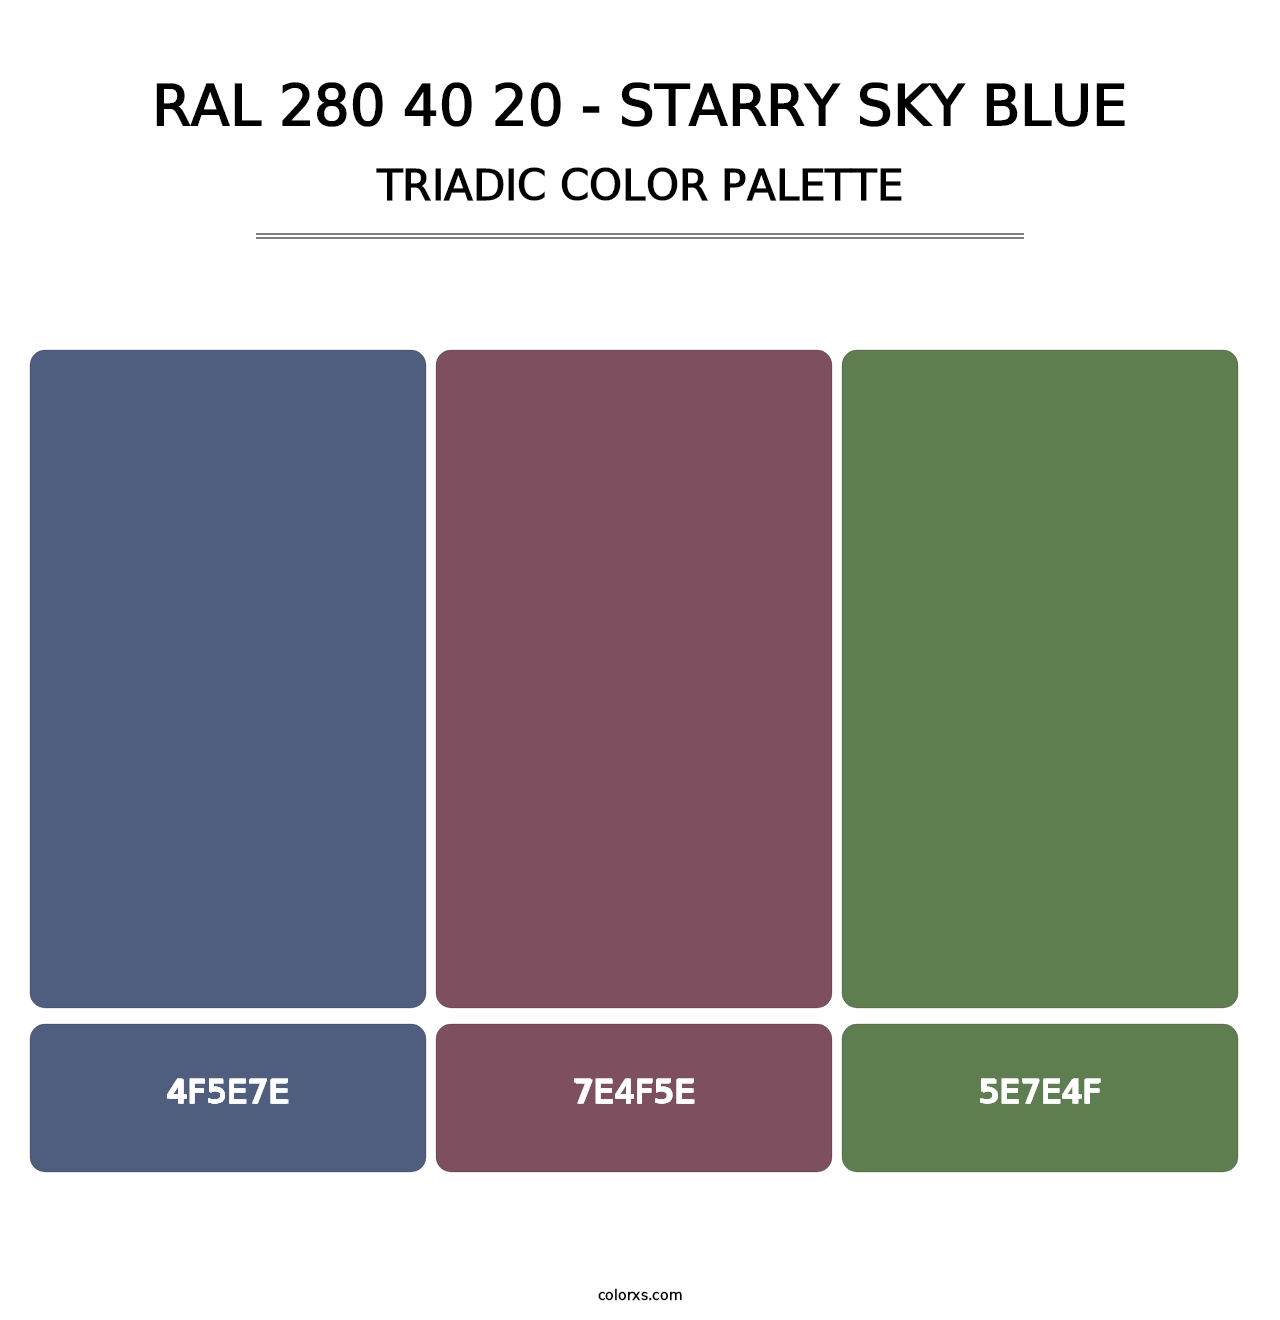 RAL 280 40 20 - Starry Sky Blue - Triadic Color Palette